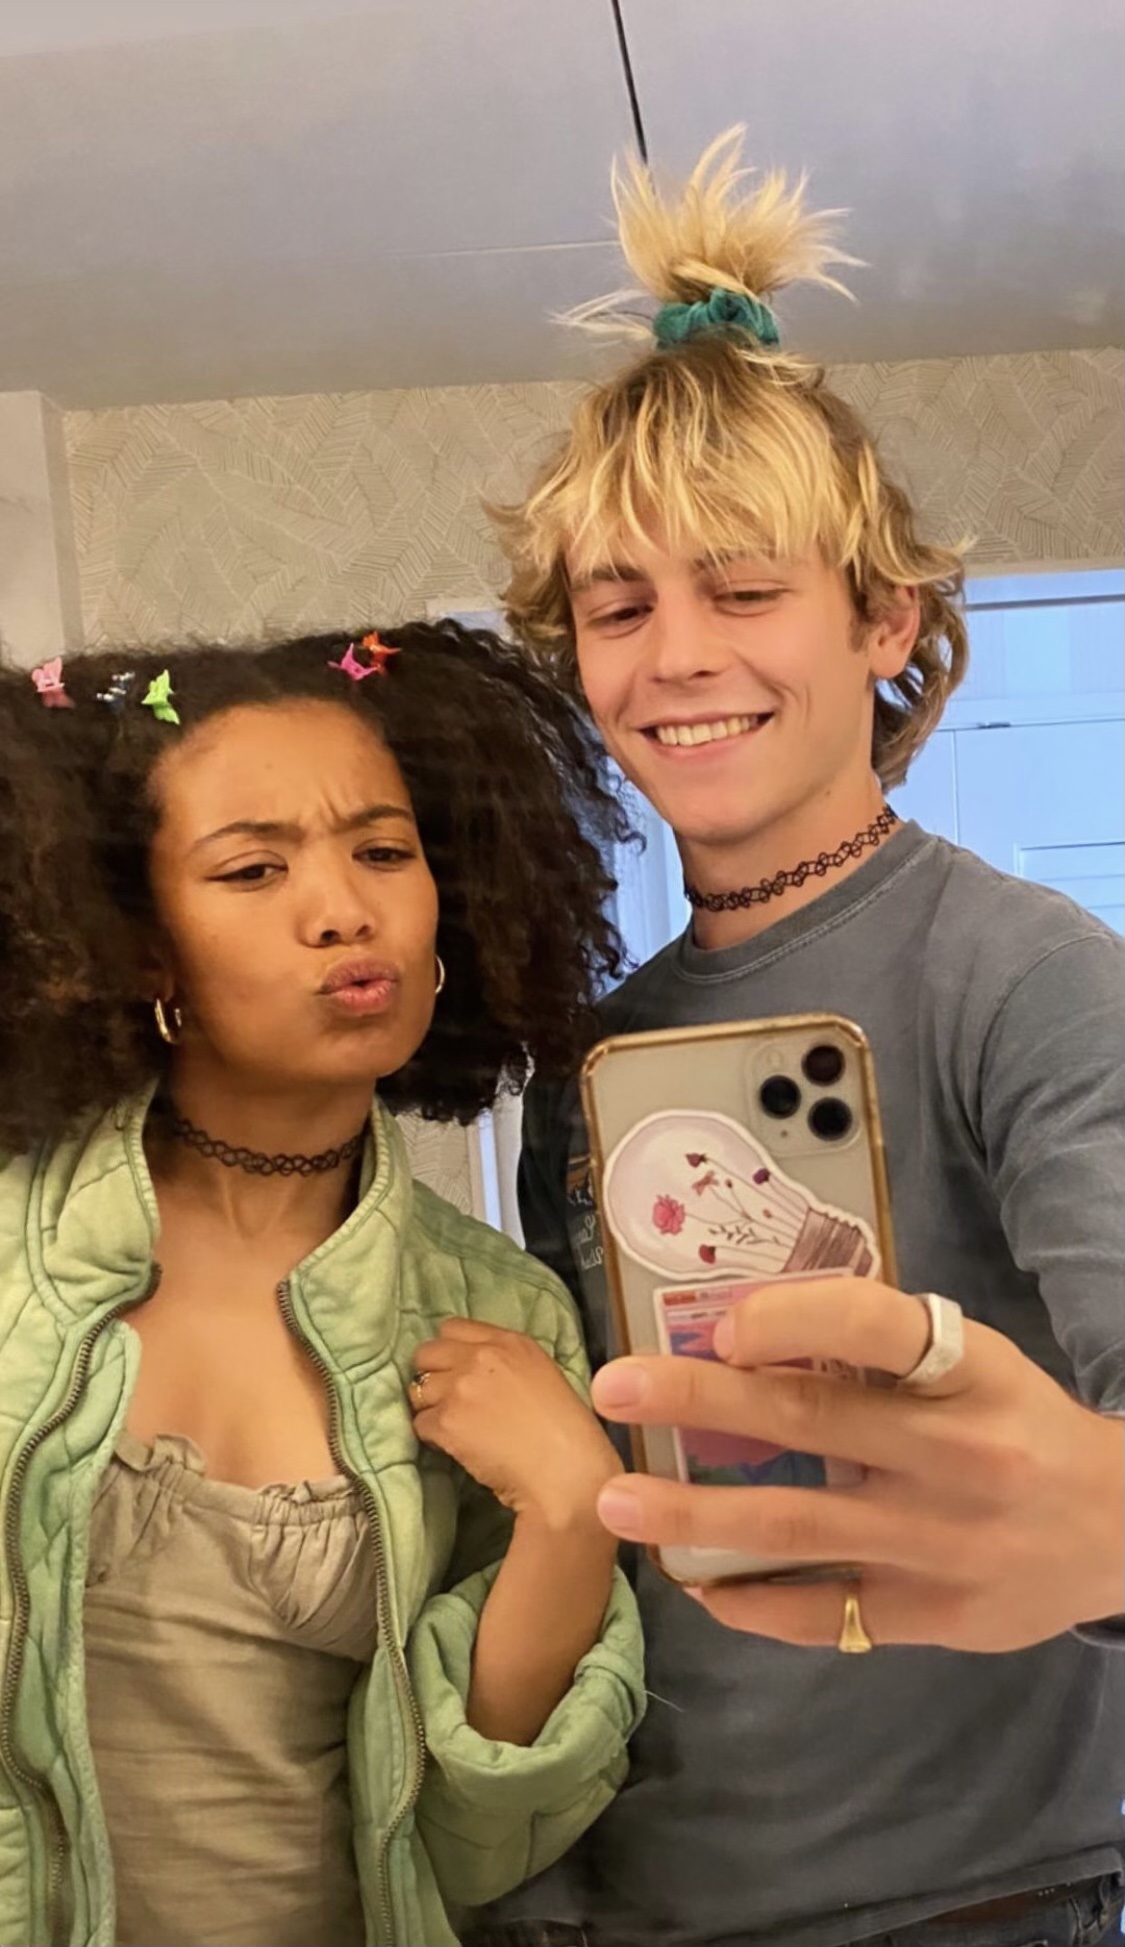 Who Is Ross Lynch Dating? 2023